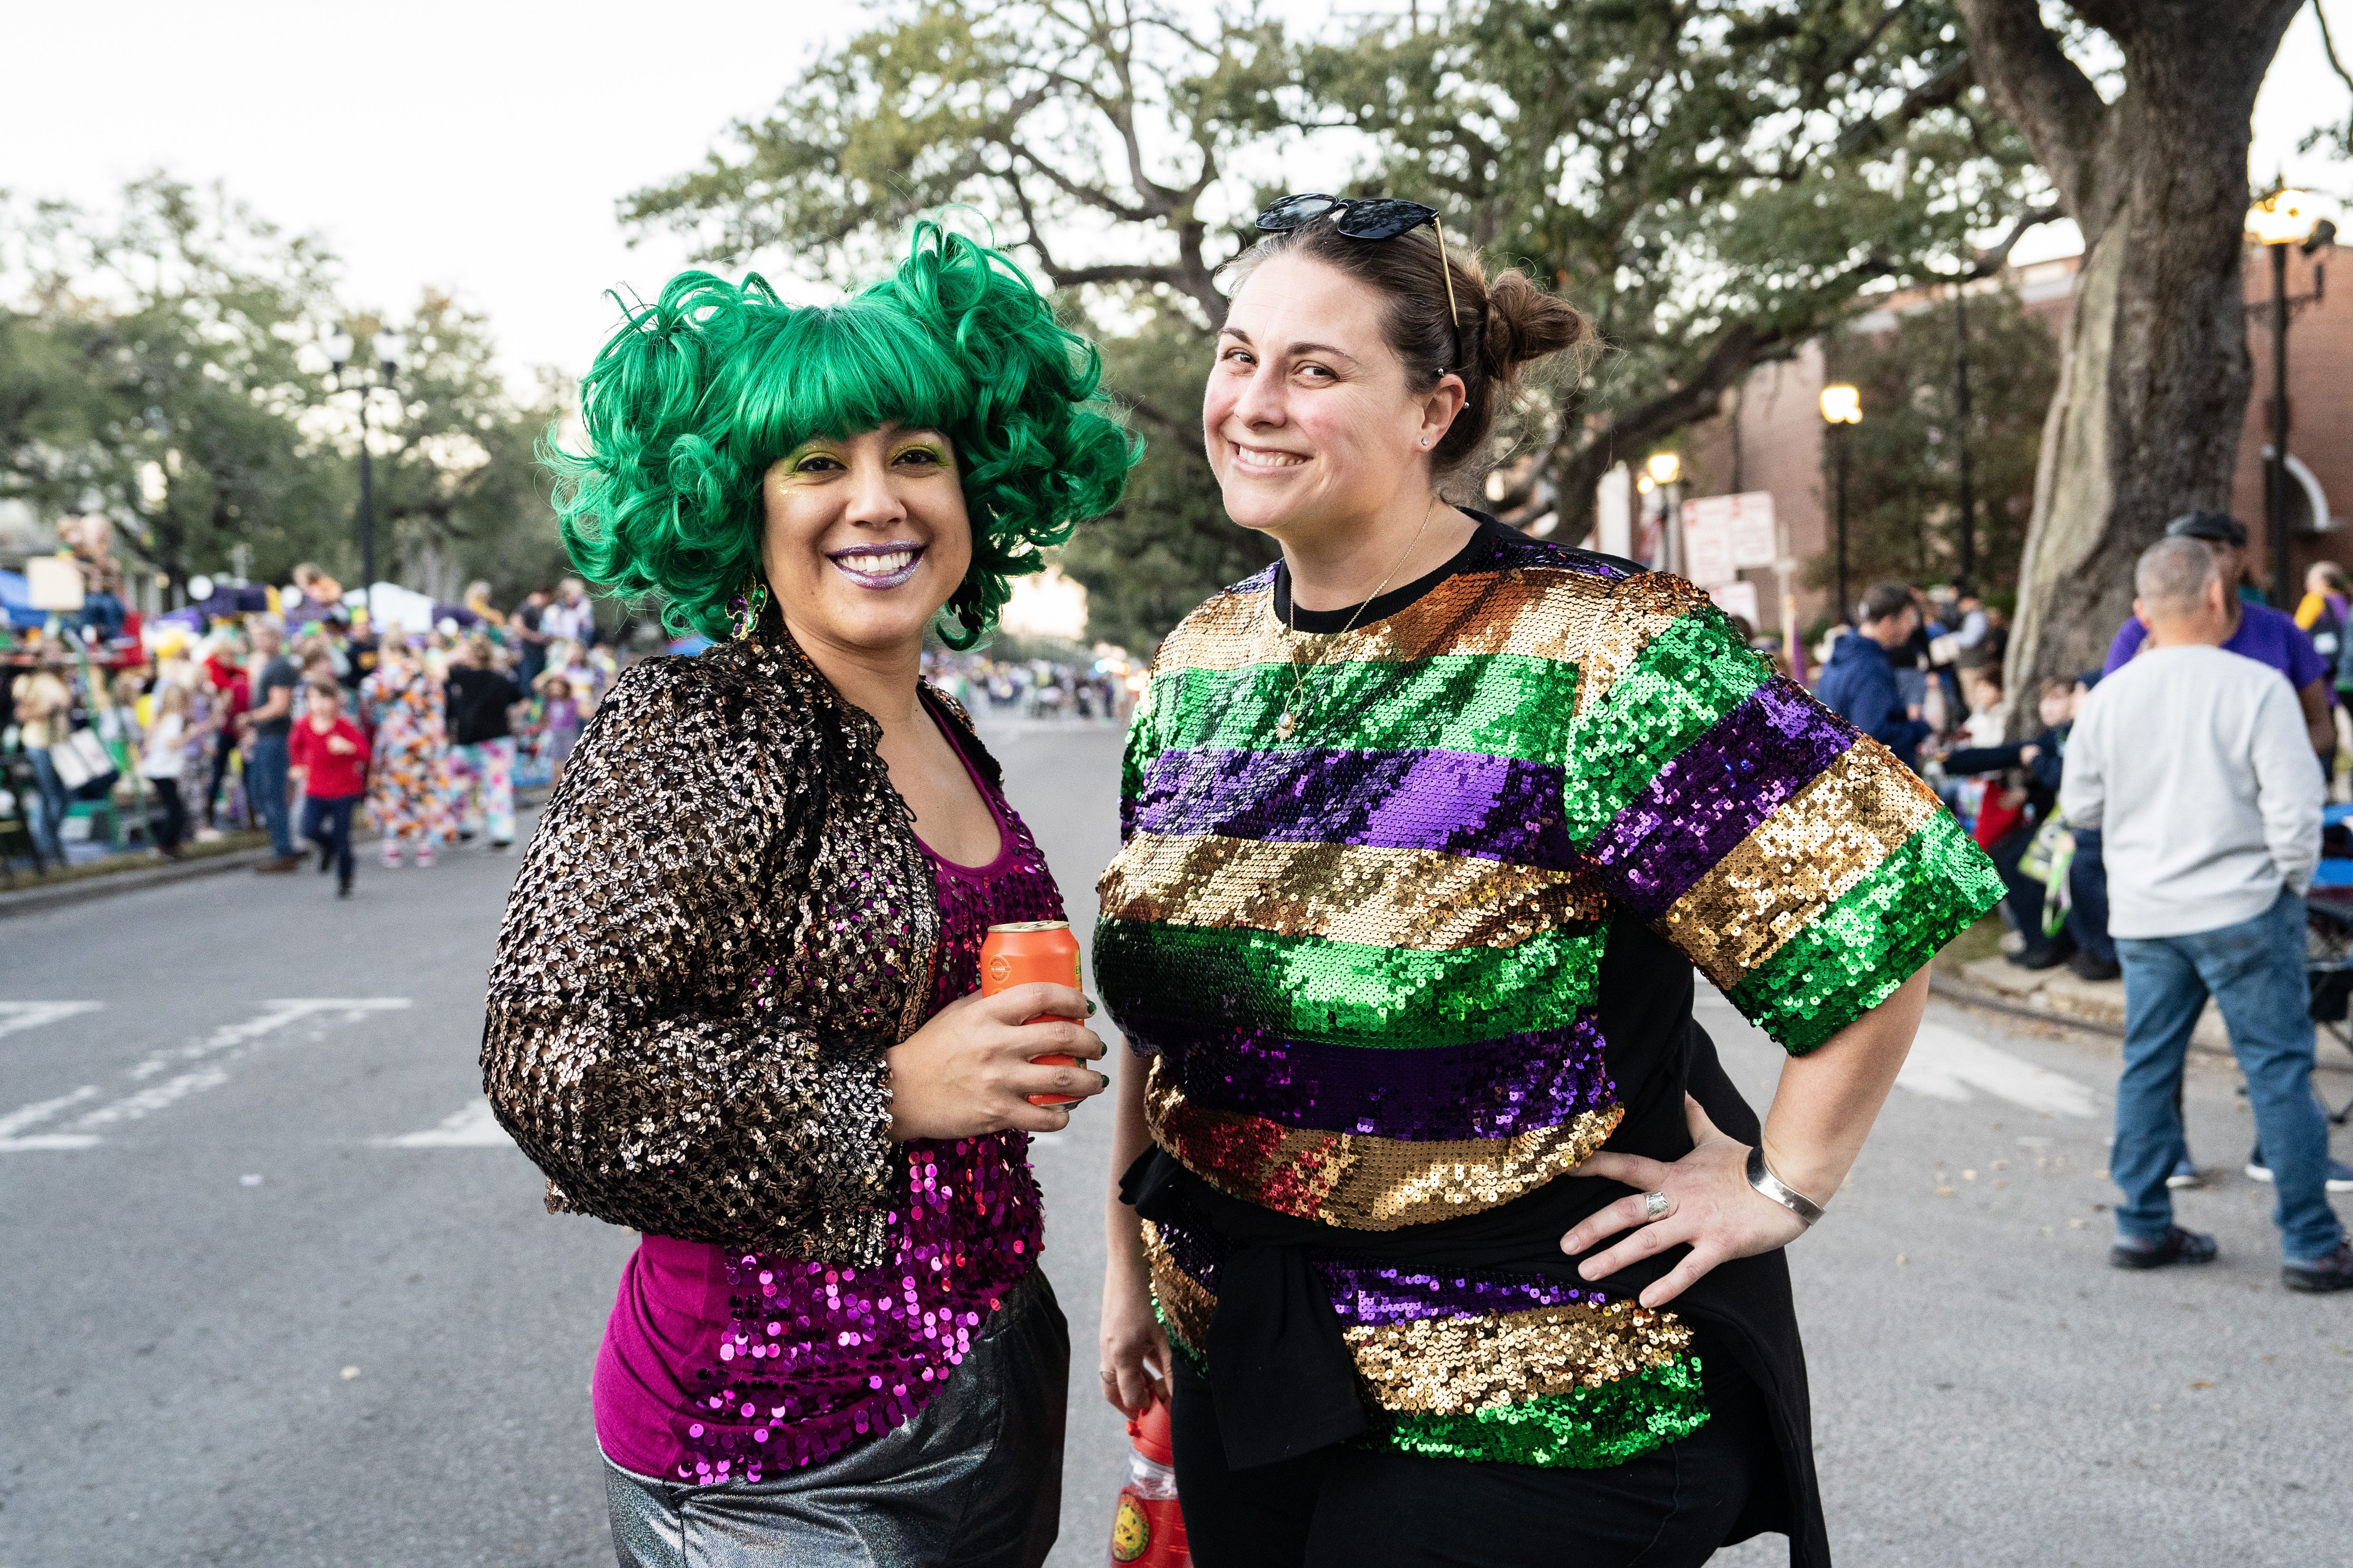 Two revelers pose for the camera on the parade route.